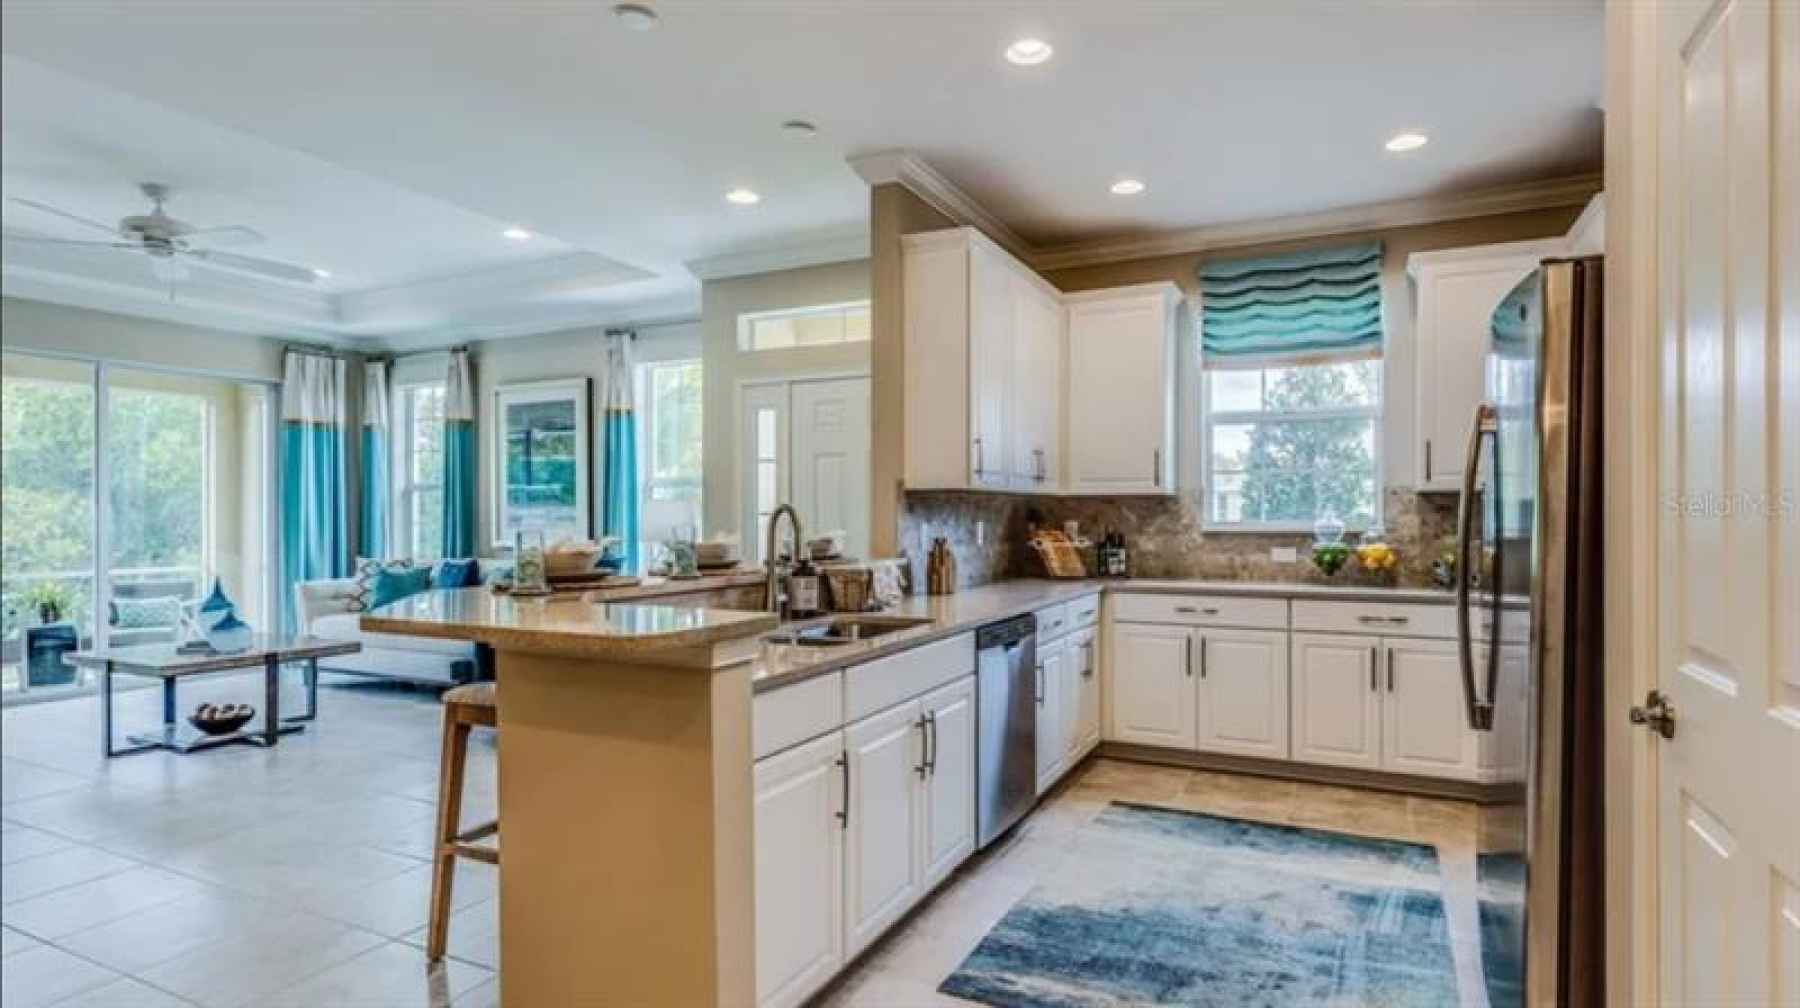 * REPRESENTATIVE PHOTO. The thoughtful layout of this kitchen has the chef's perspective in mind!